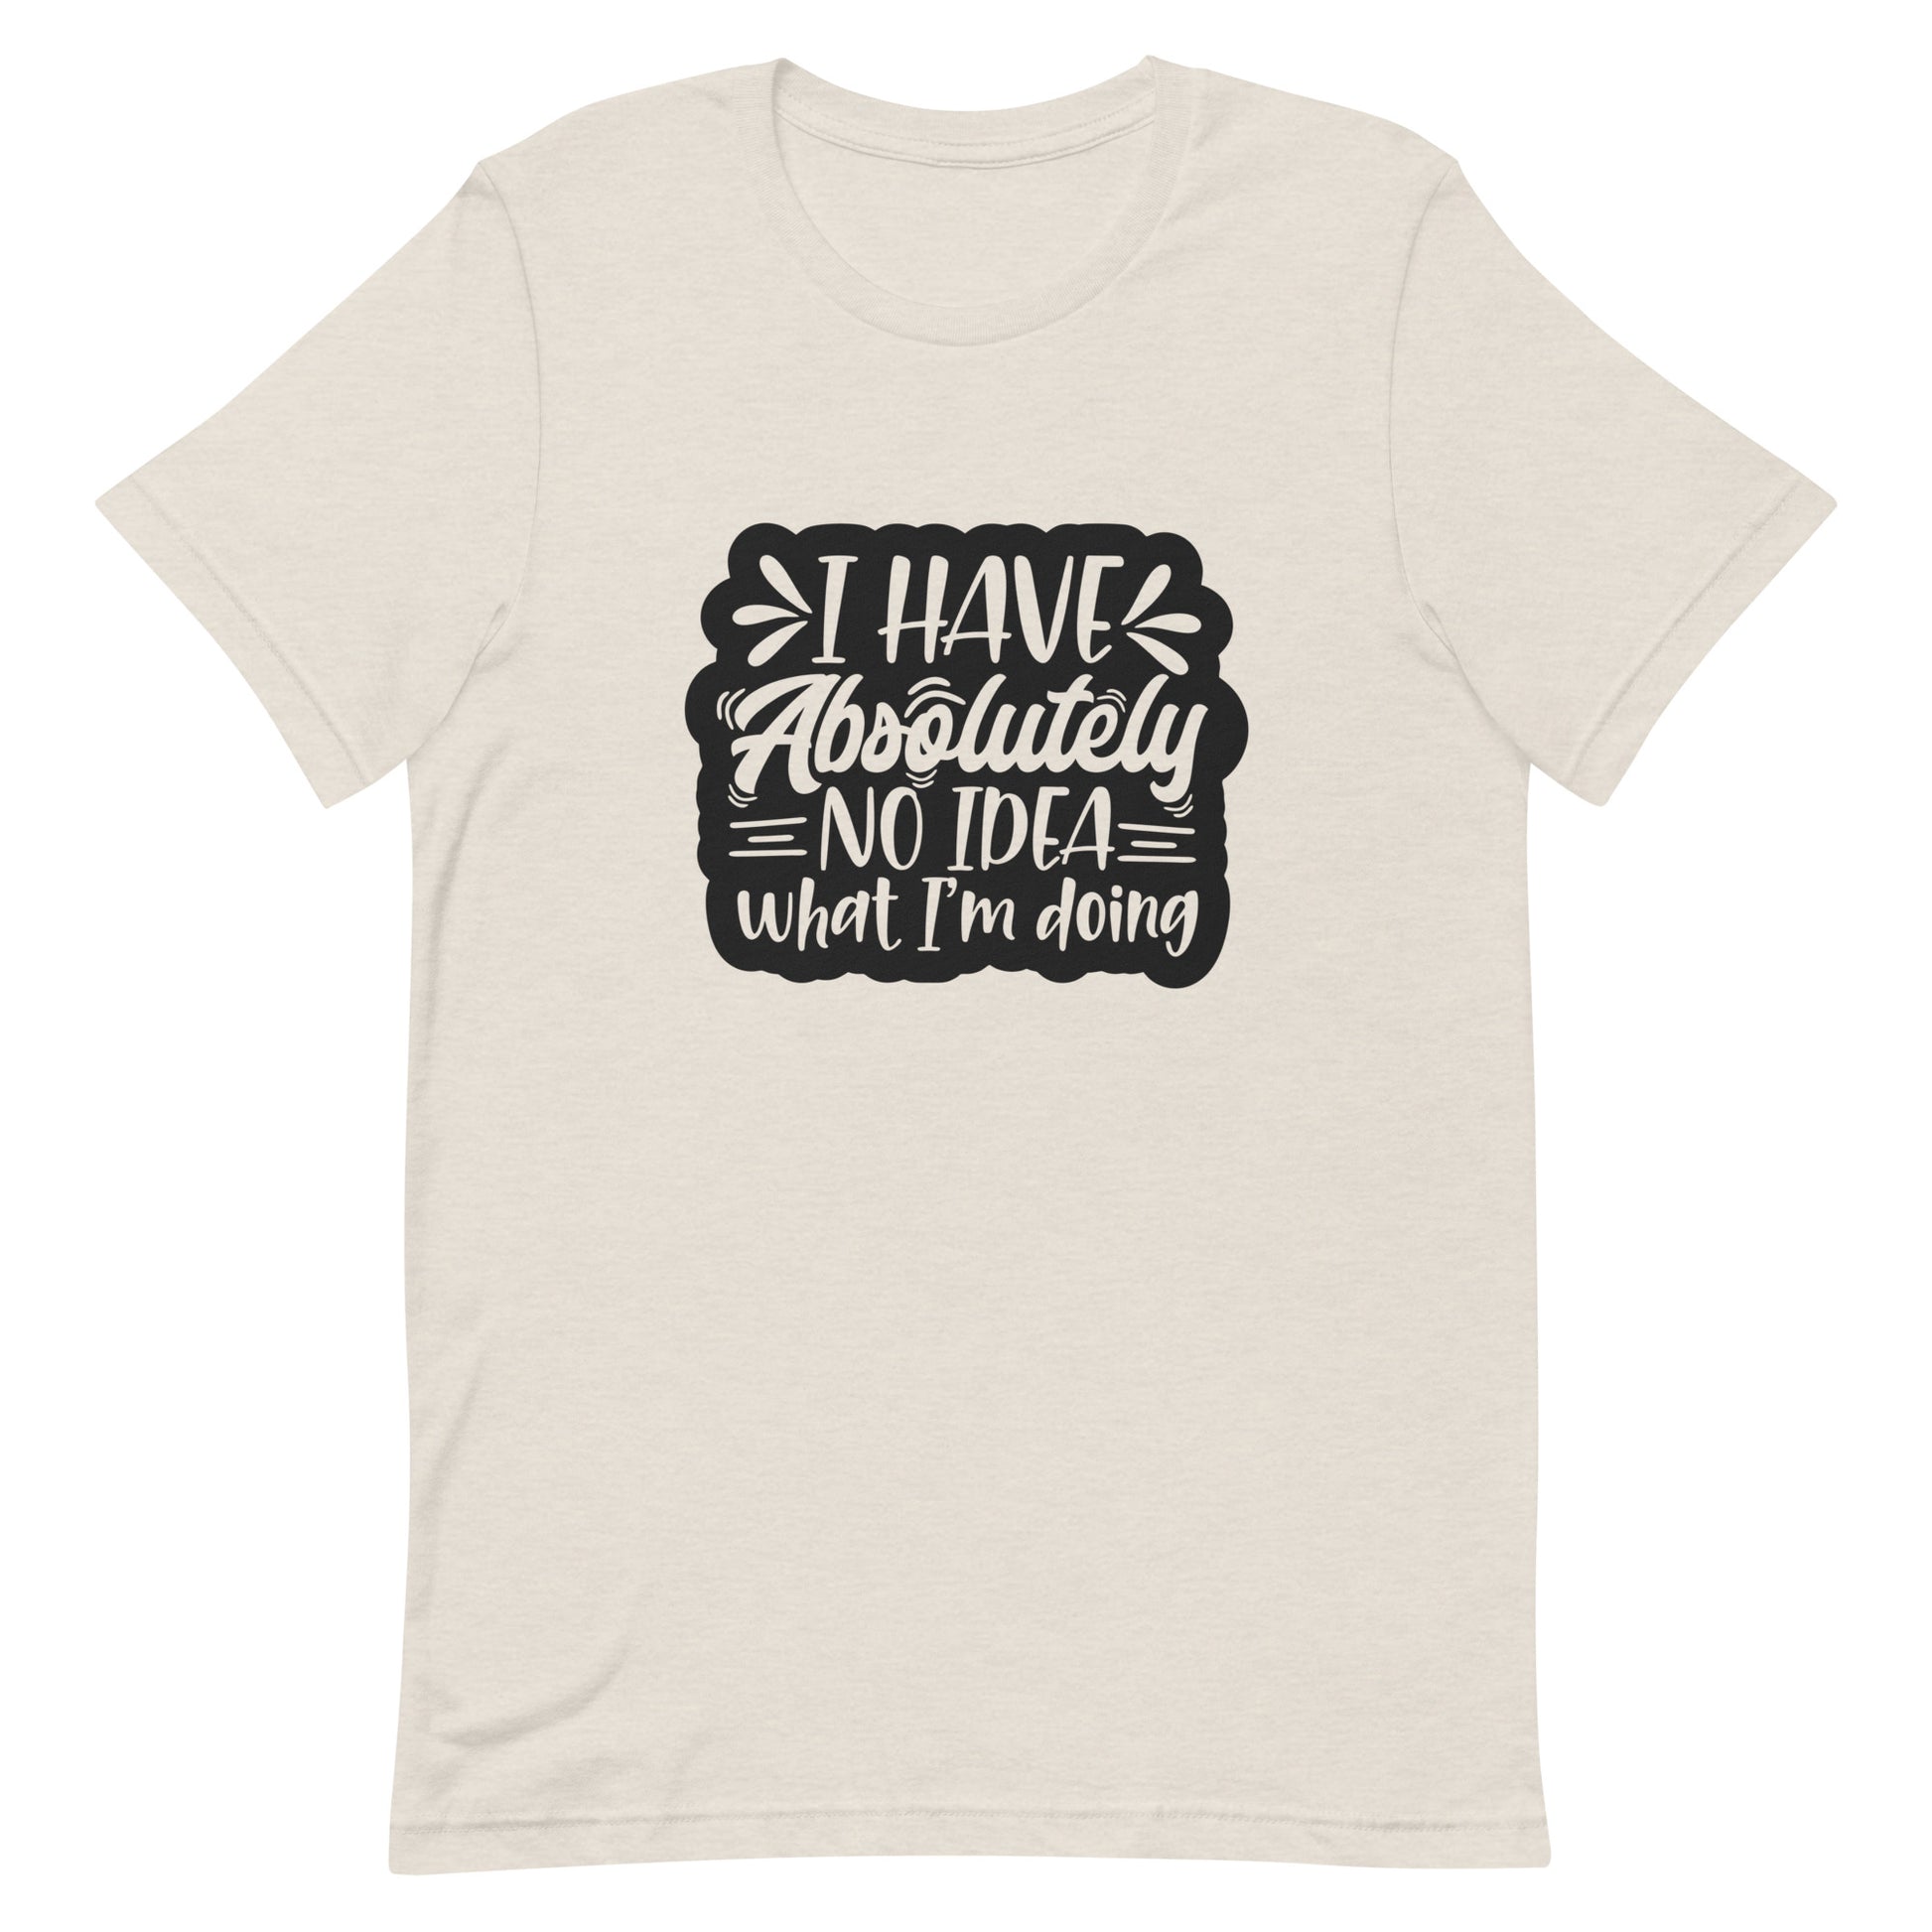 I Have Absolutely No Idea What I'm Doing Unisex T-shirt